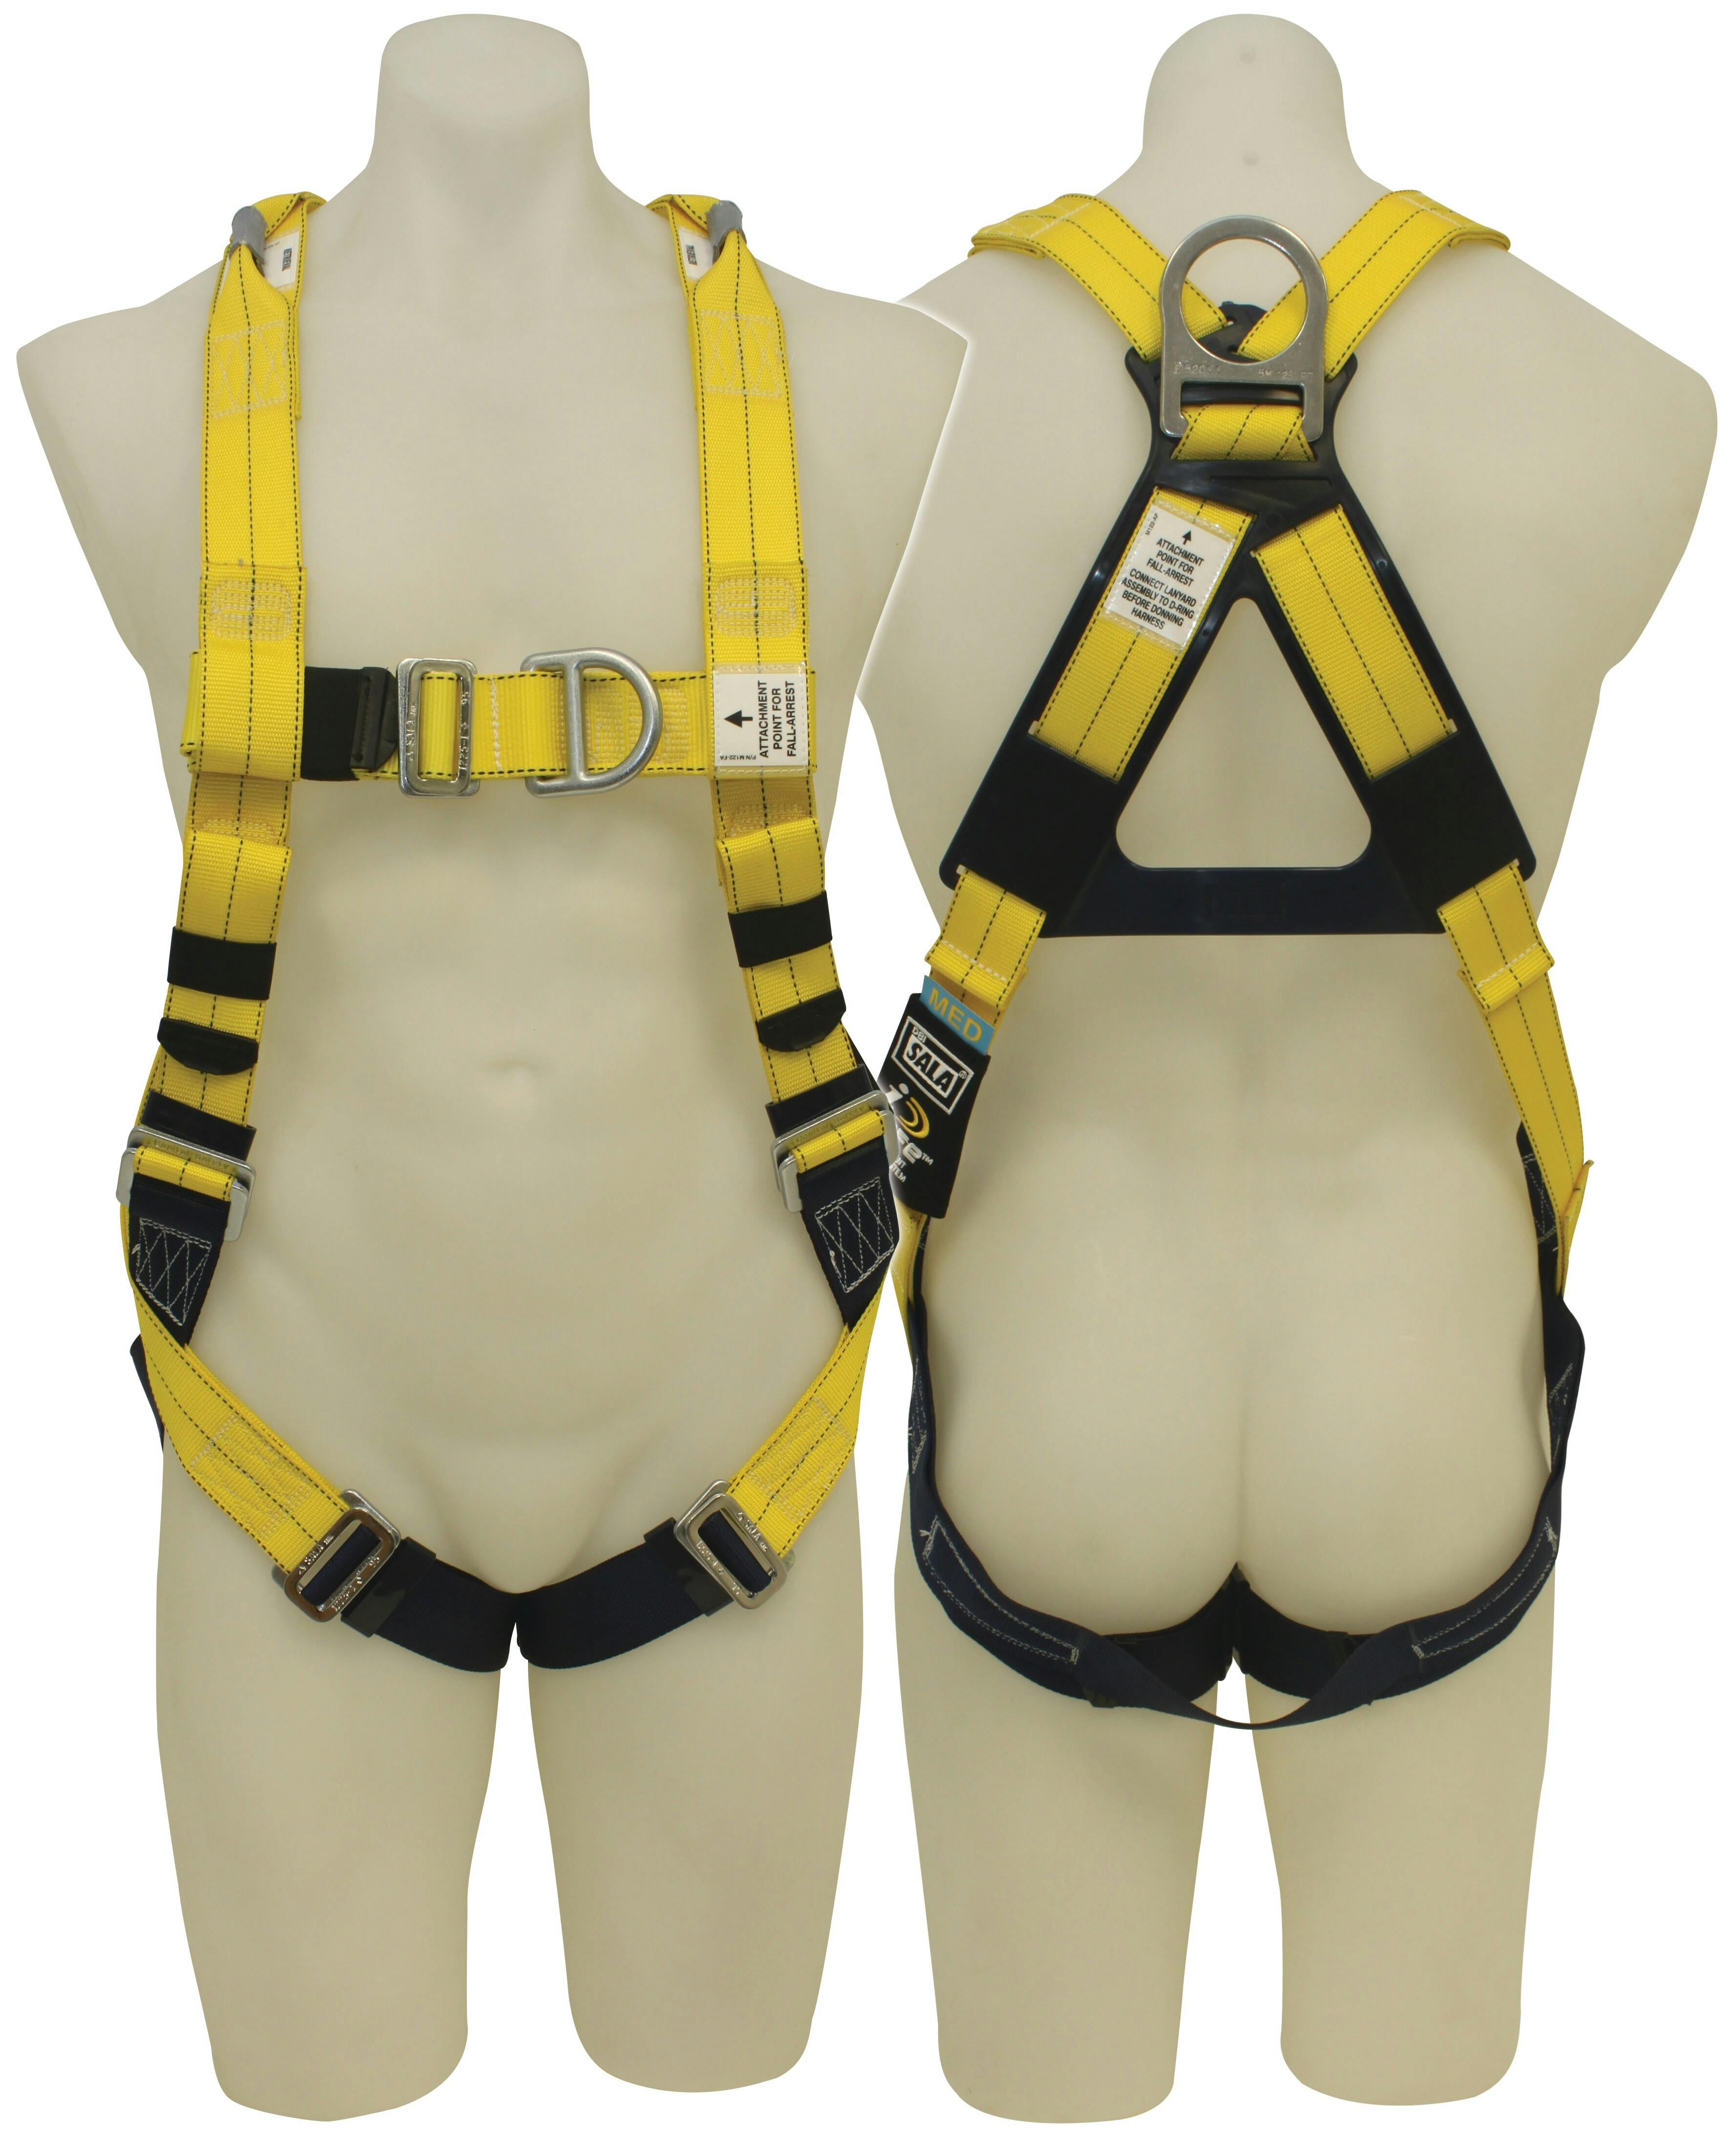 3M™ DBI-SALA® Delta™ Riggers Harness with Stainless Steel Hardware 803XL1022, Yellow, Extra Large, 1 EA/Case